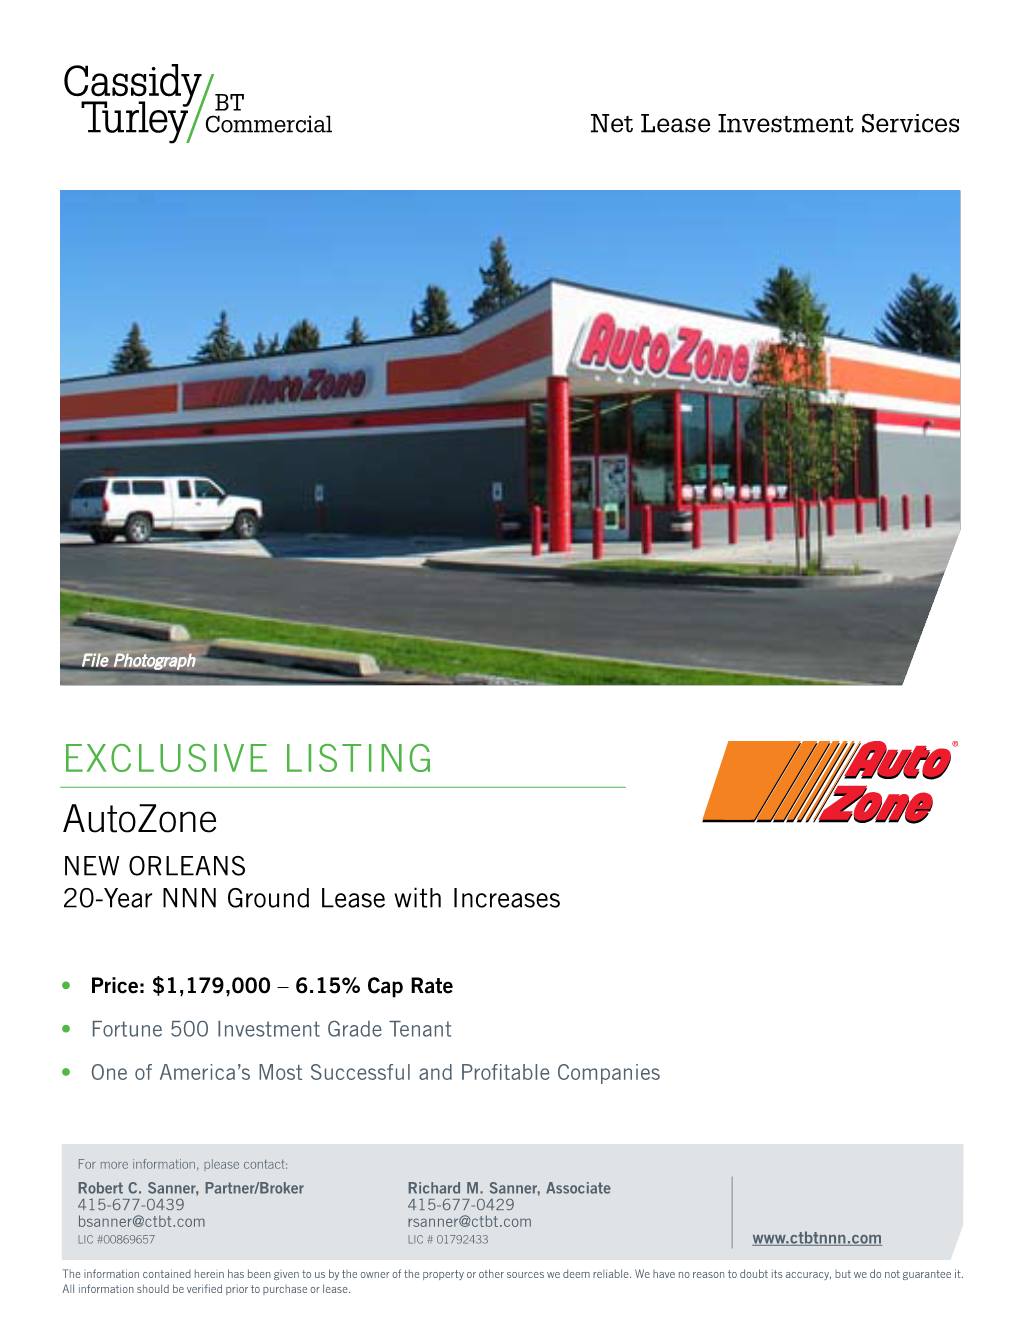 EXCLUSIVE LISTING Autozone New Orleans 20-Year NNN Ground Lease with Increases